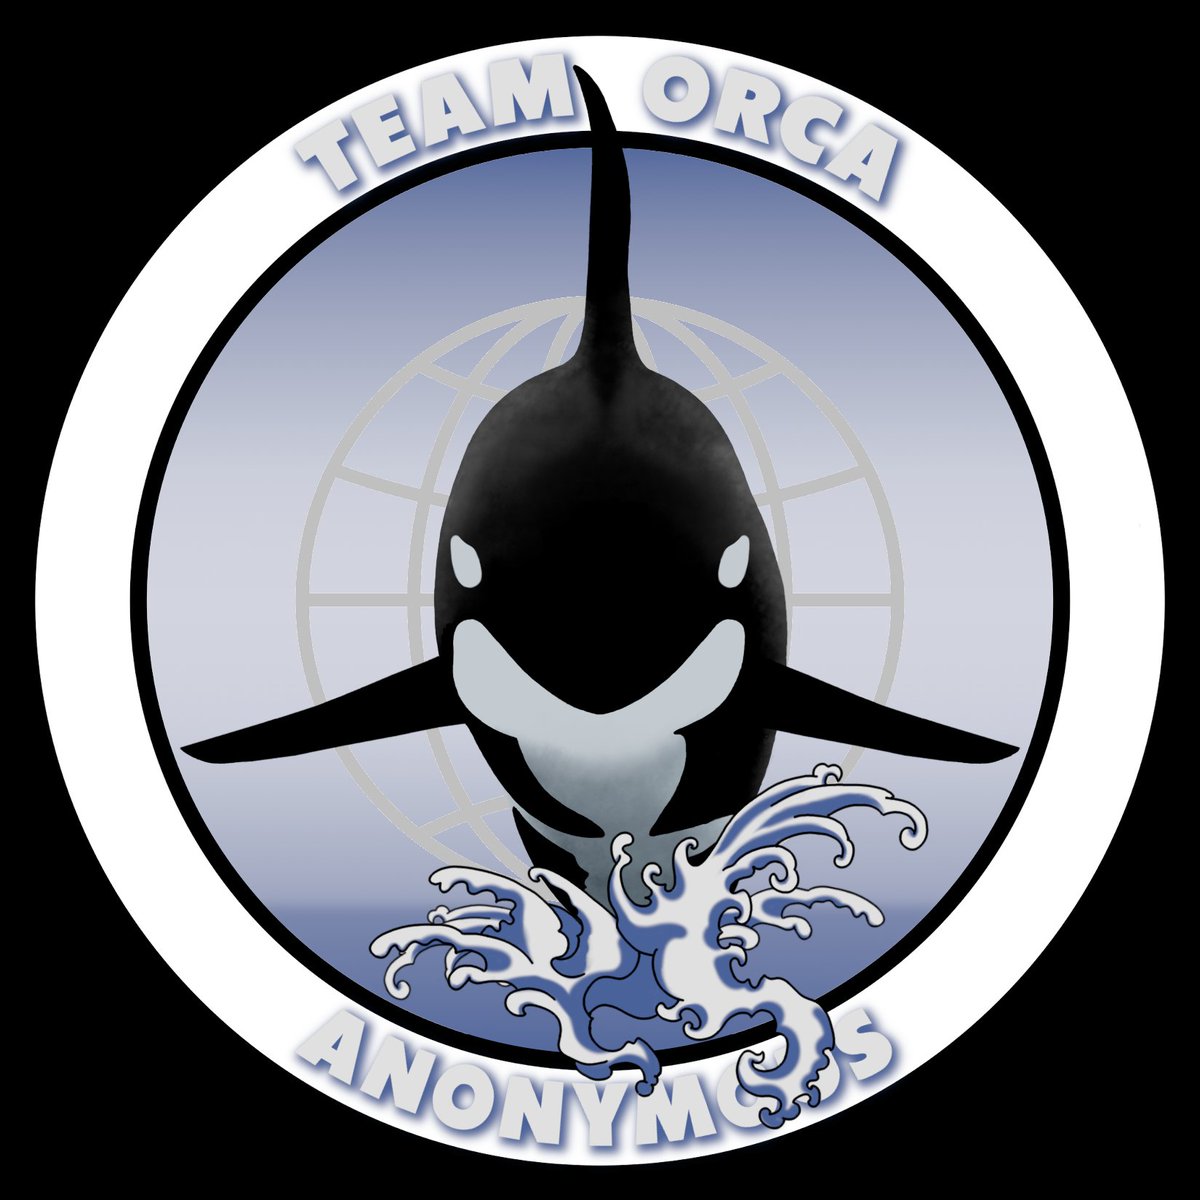 #TeamOrca 
Eat the Rich
#Anonymous